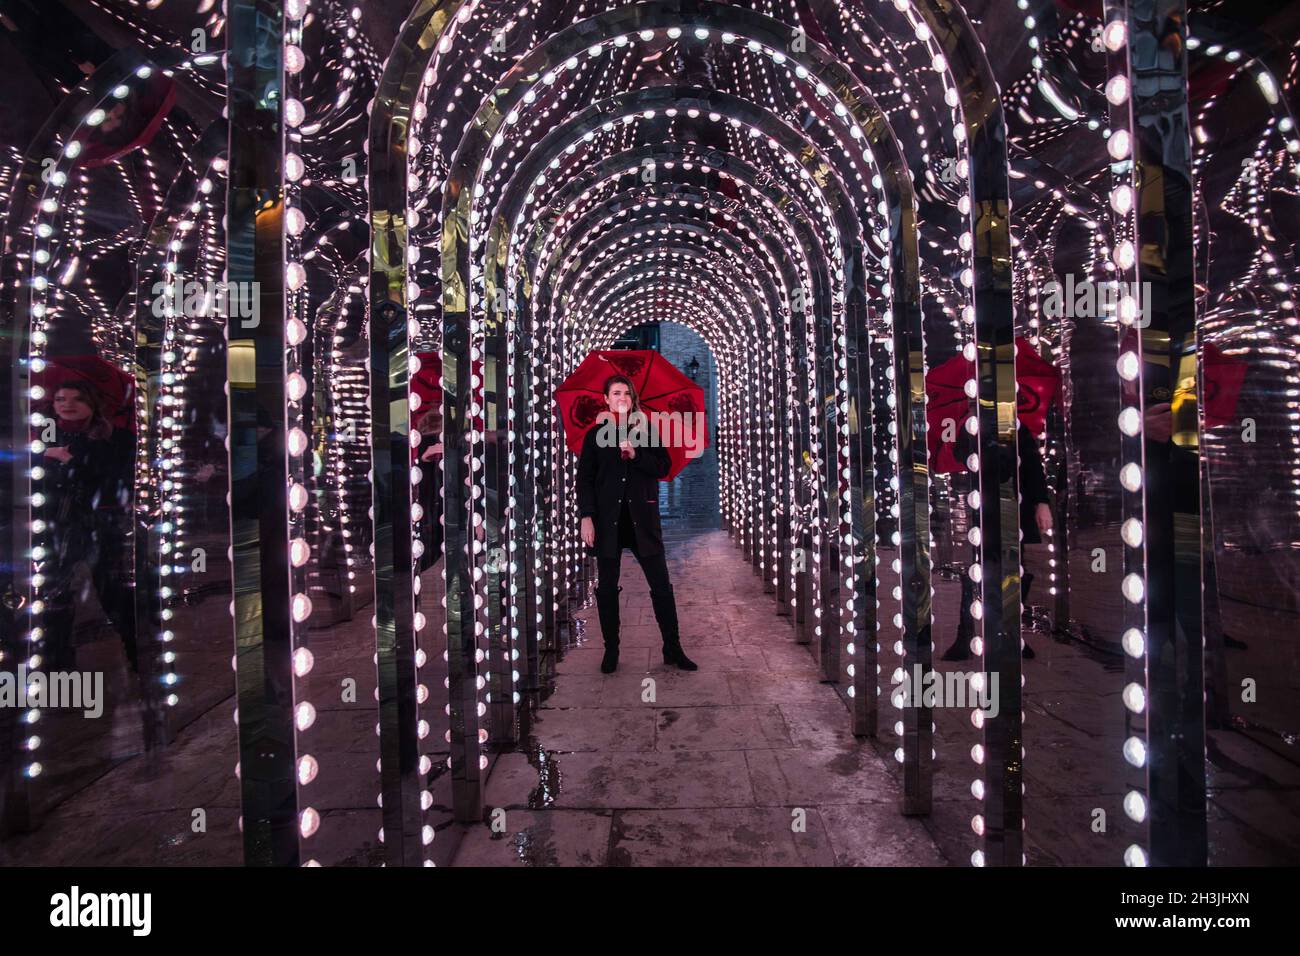 London, UK. 29th Oct, 2021. In the heart of the west end ahead of Christmas, this corridor of light illuminate the city.Paul Quezada-Neiman/Alamy Live News Credit: Paul Quezada-Neiman/Alamy Live News Stock Photo